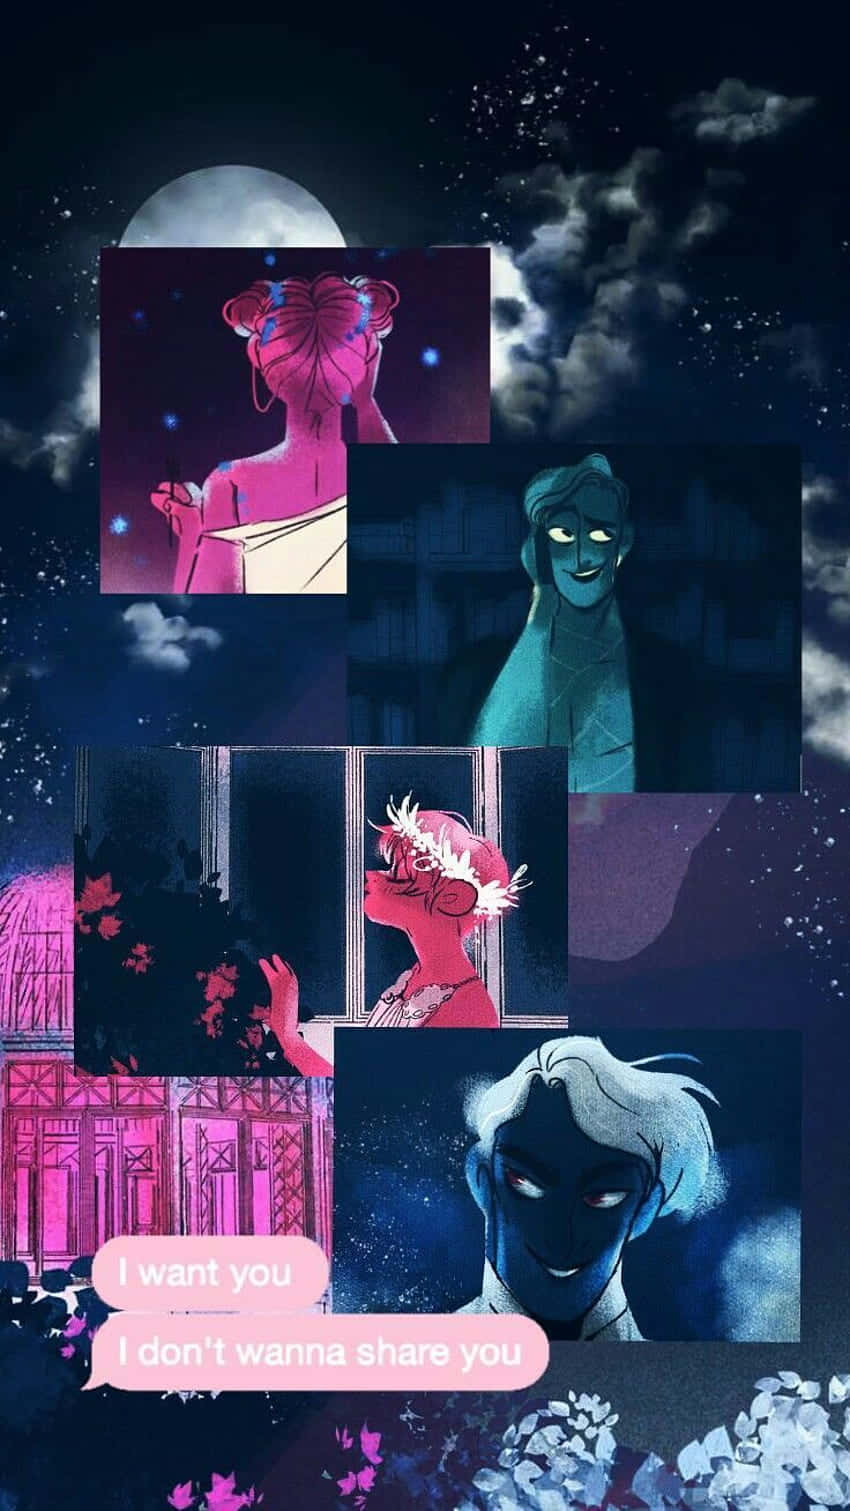 Download Hades And Persephone's Star Crossed Romance Unfolds In The Comic Webtoon Lore Olympus. Wallpaper